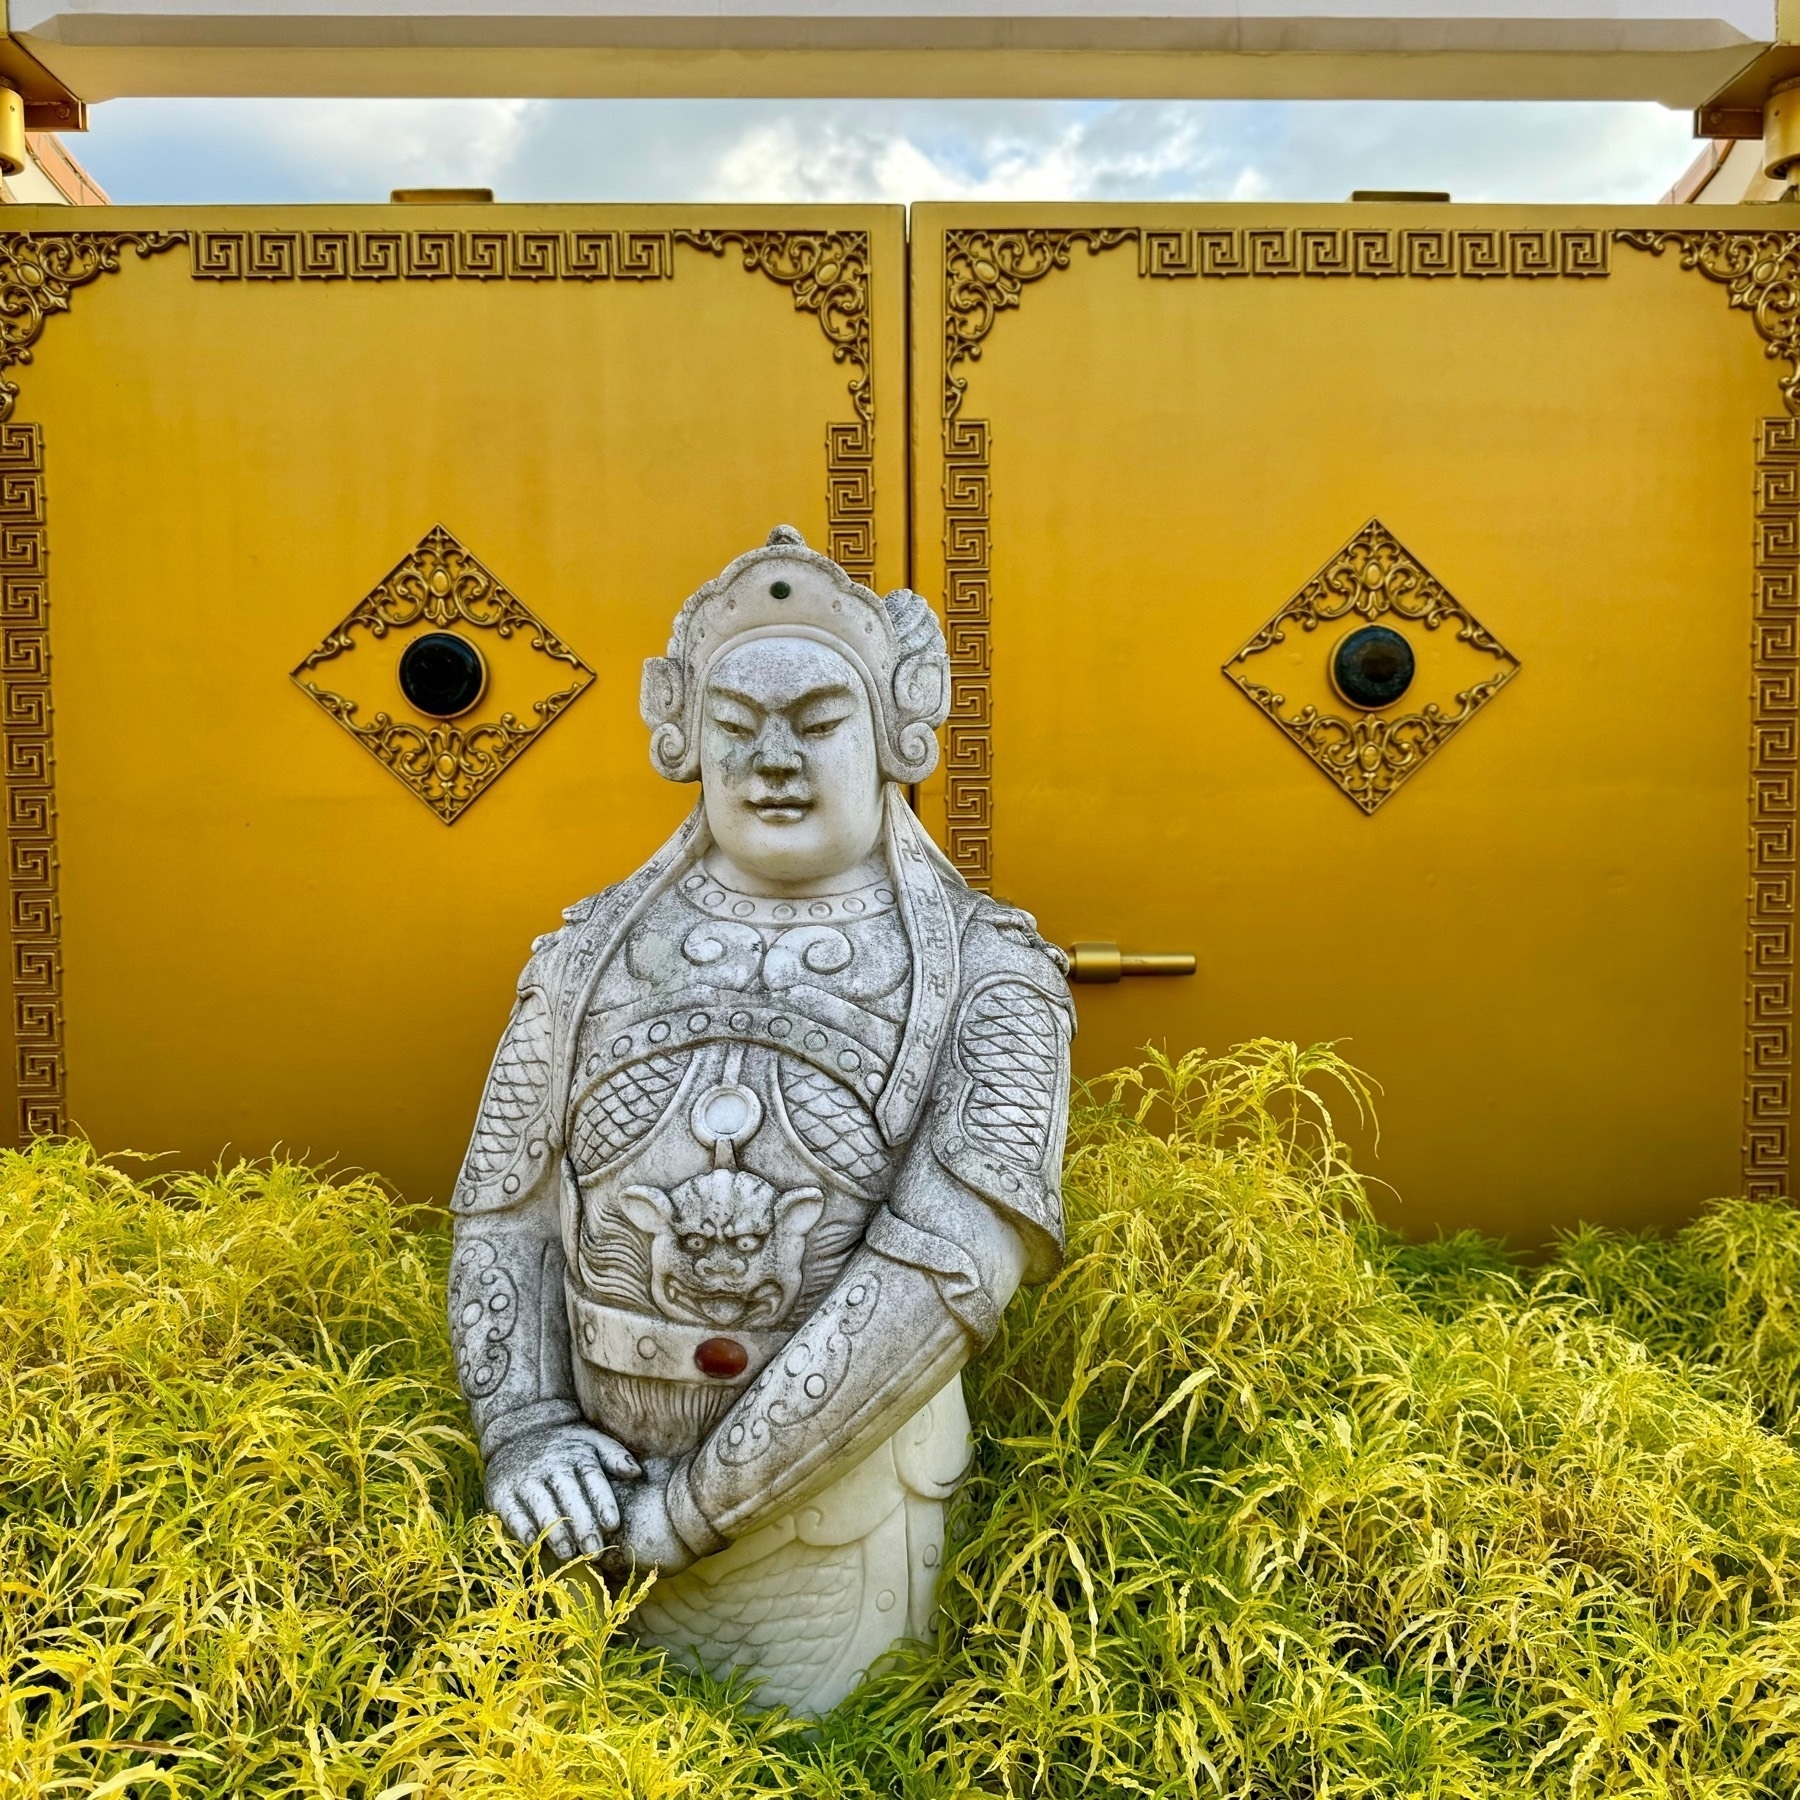 A religious statue in a temple, standing waist-down in a light-green bush, with a backdrop of two yellow decorated doors